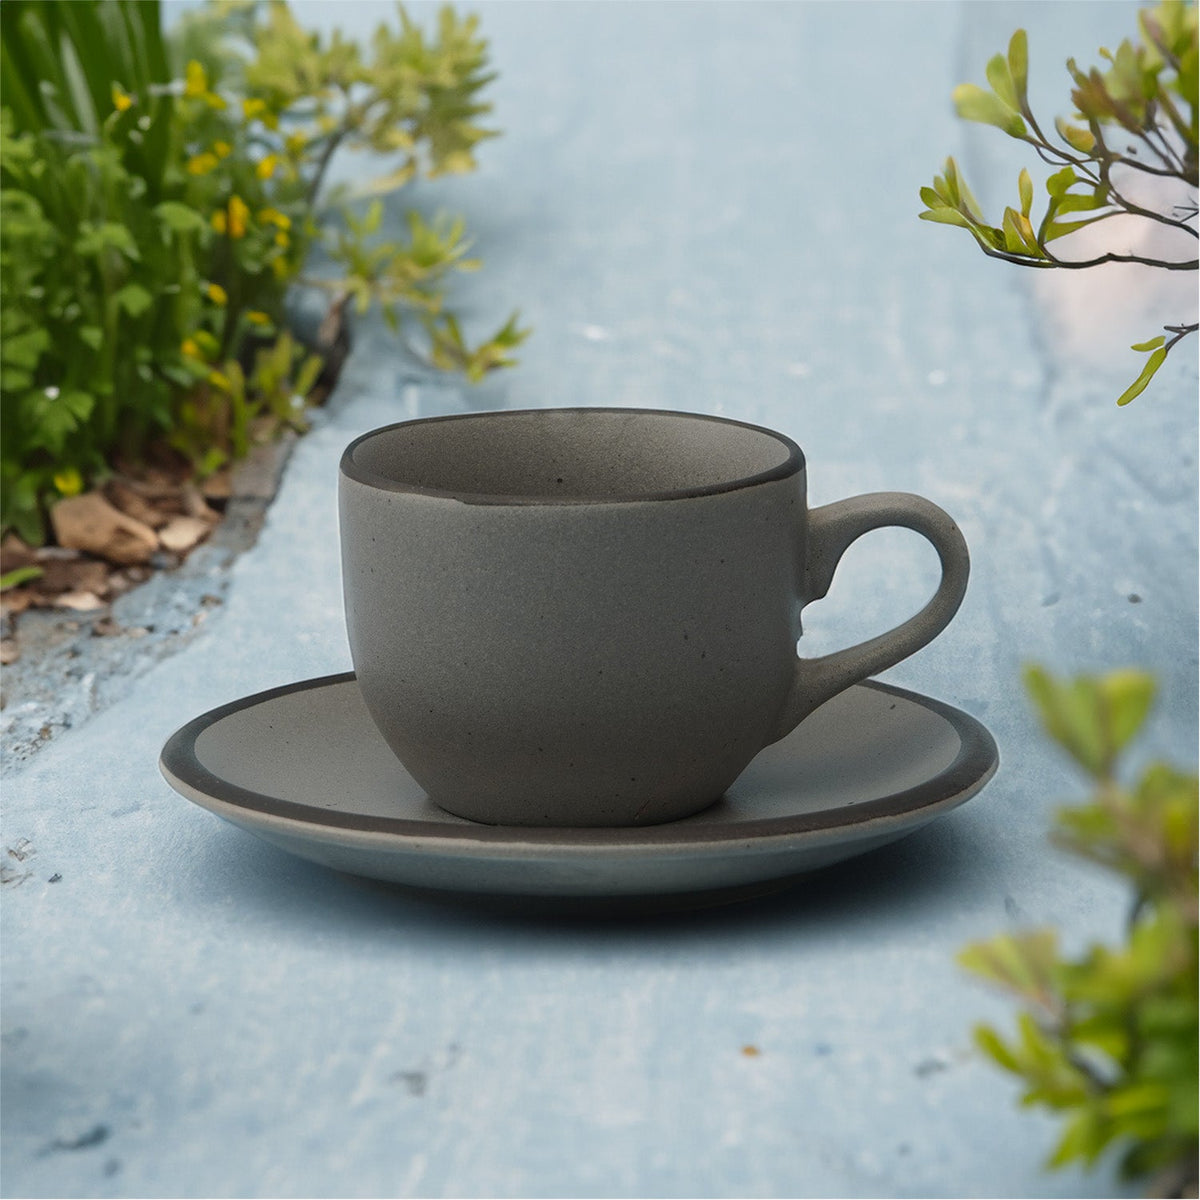 Claymistry Ceramic Saucer and Cup Combo | Grey with Black Rim Matte Cupset| Set of 6 | Coffee Mugs | Ceramic Combos | Tea Kettles